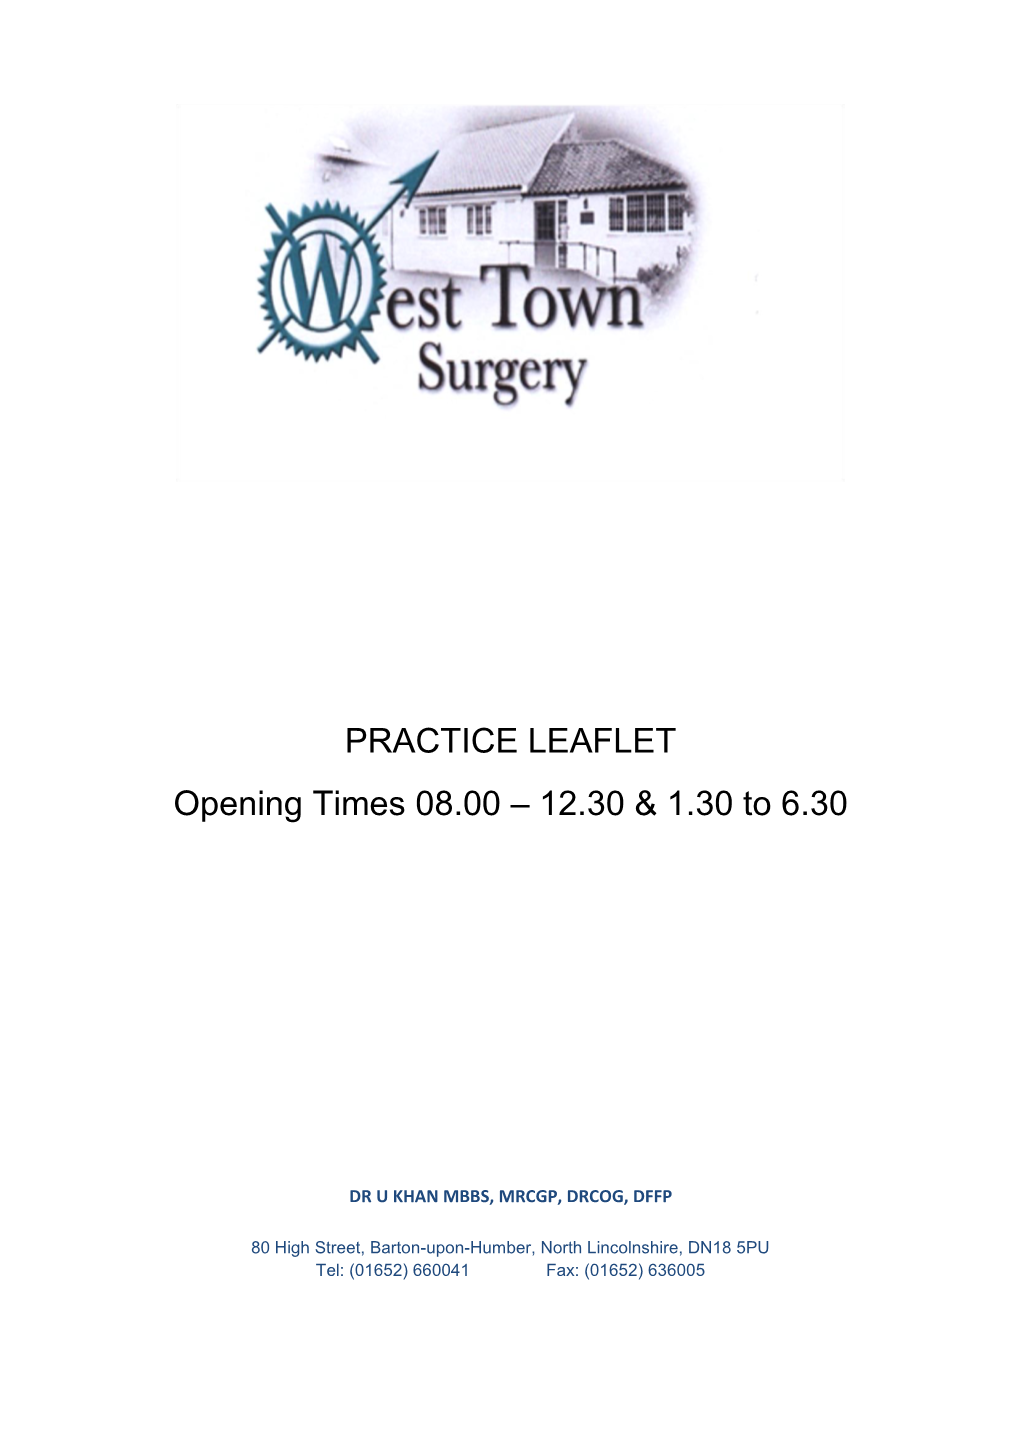 PRACTICE LEAFLET Opening Times 08.00 – 12.30 & 1.30 to 6.30